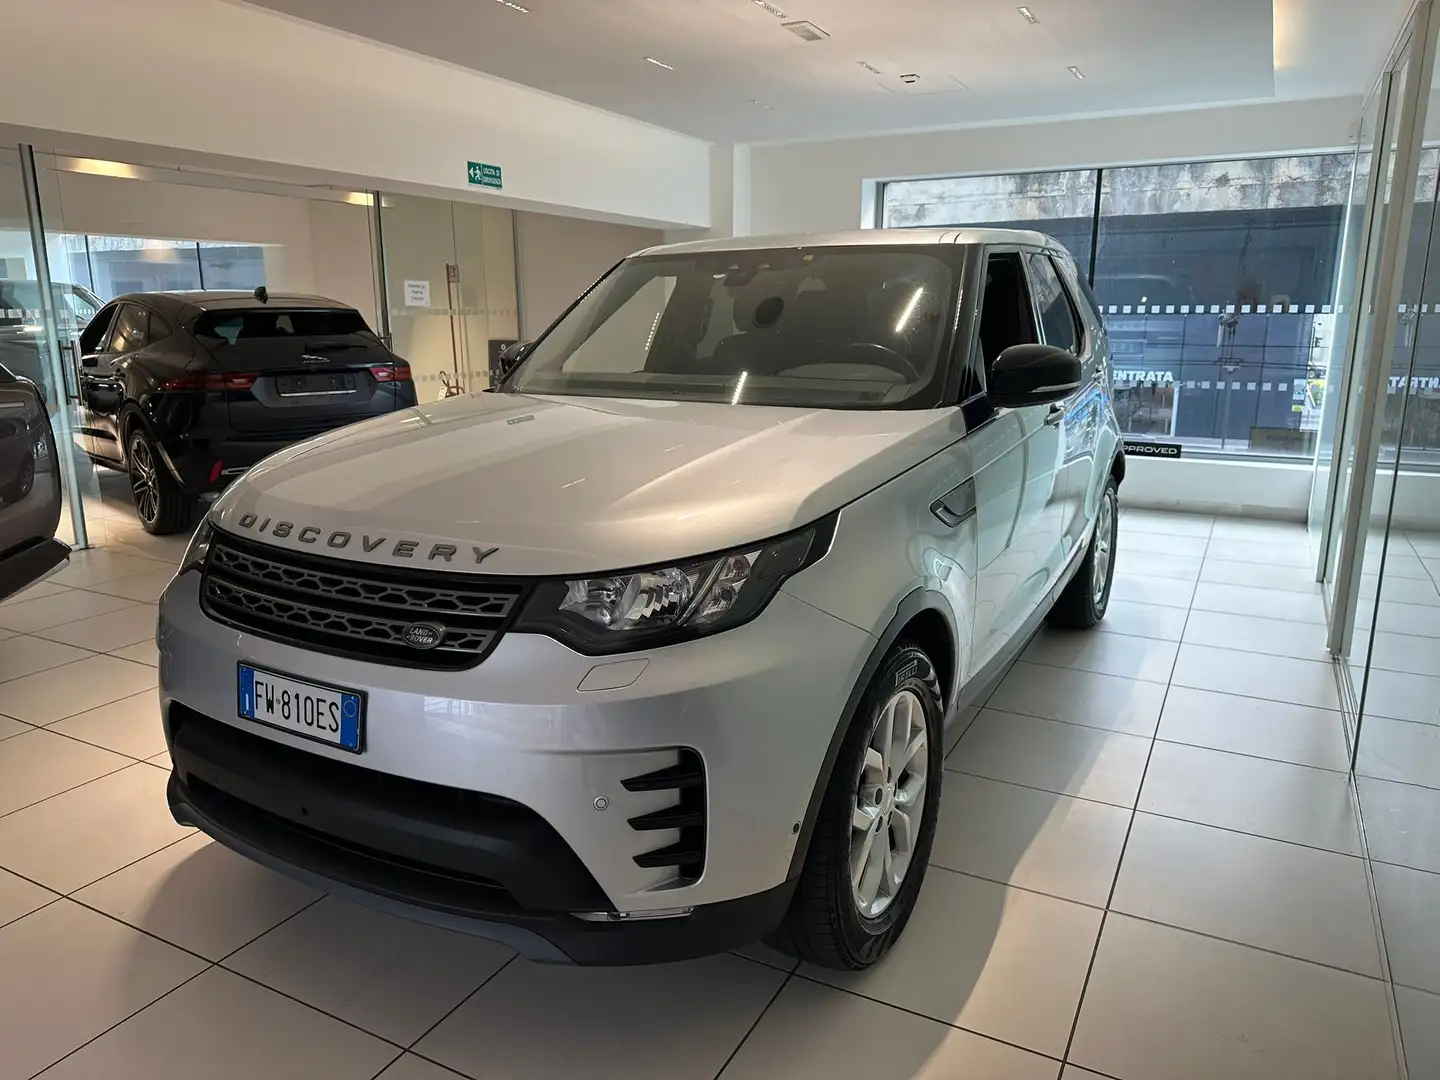 Land Rover Discovery DISCOVERE 5 2.0 SD4 240 CV 7 POSTI MOTORE NUOVO Gris - 1